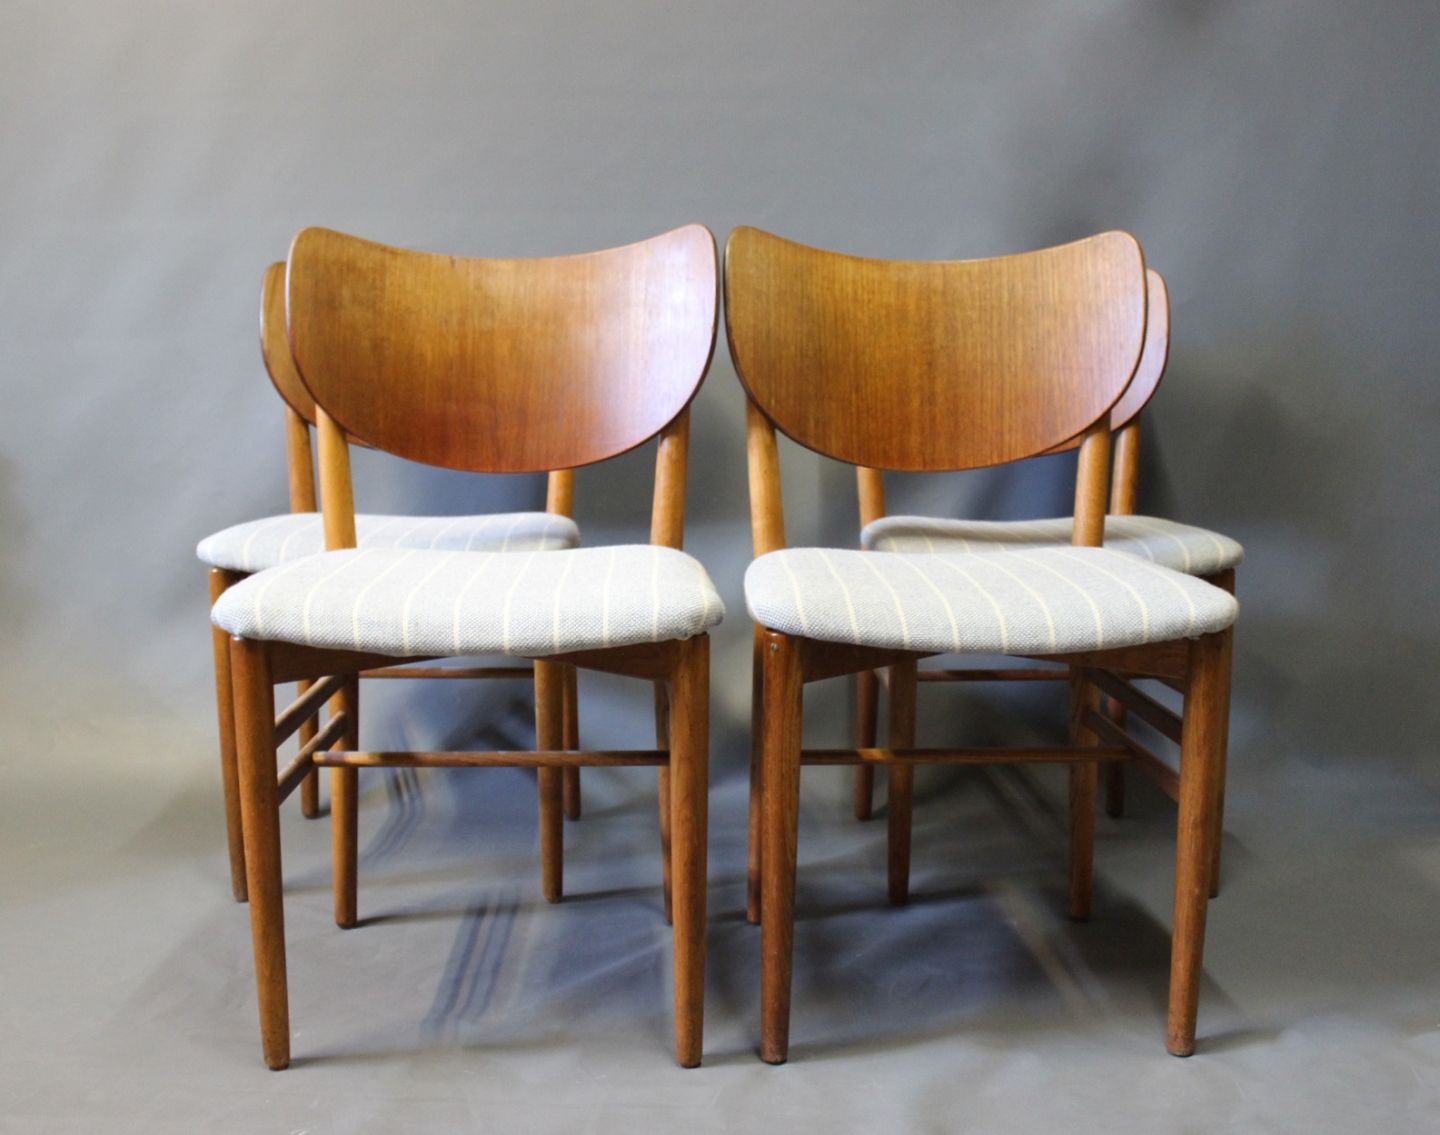 WorldAntique.net - A set of 4 dining room chairs designed by Nils